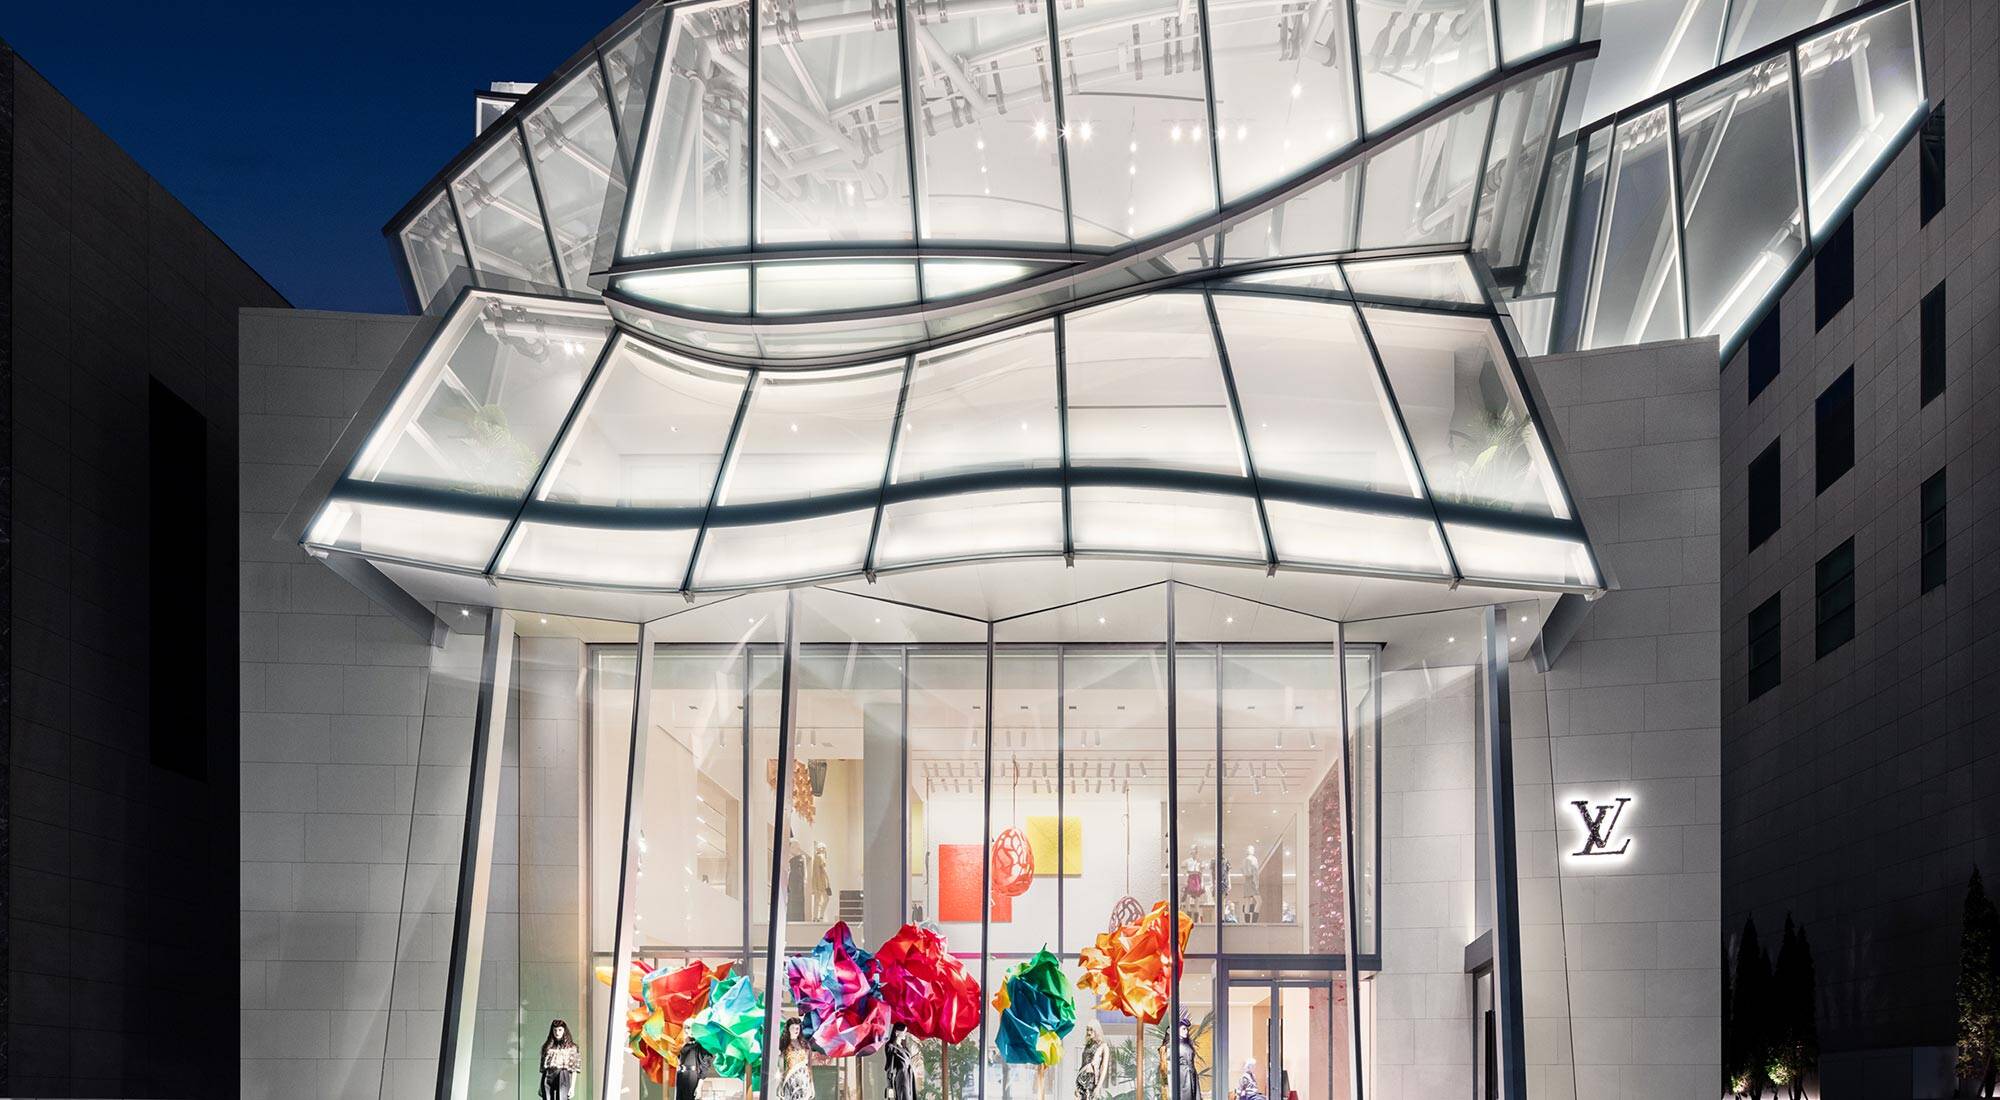 Inside Louis Vuitton and Frank Gehry's Luminous New Fragrance